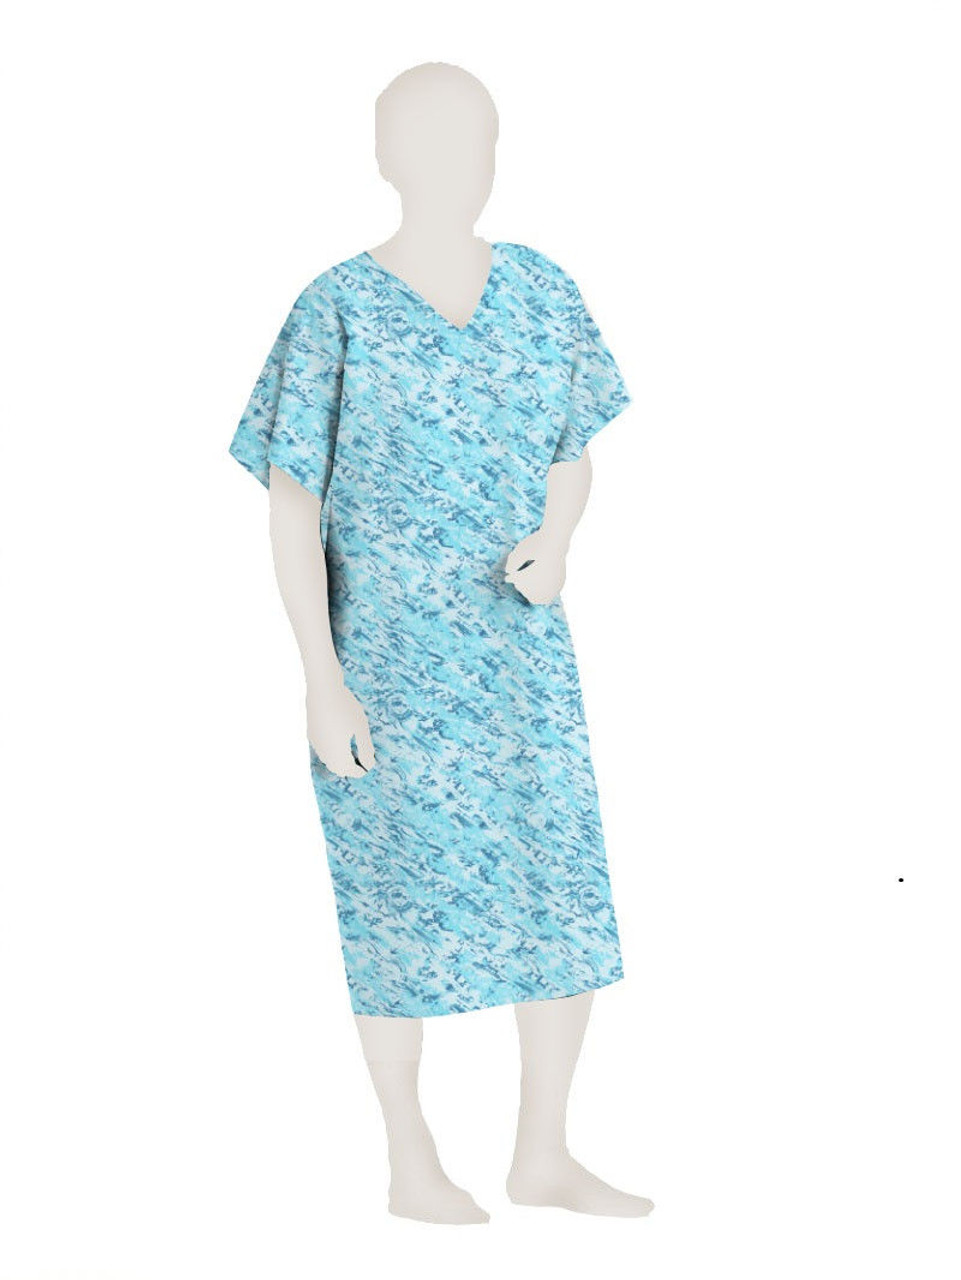 Hyperbaric Patient Gowns, Blue by Medline